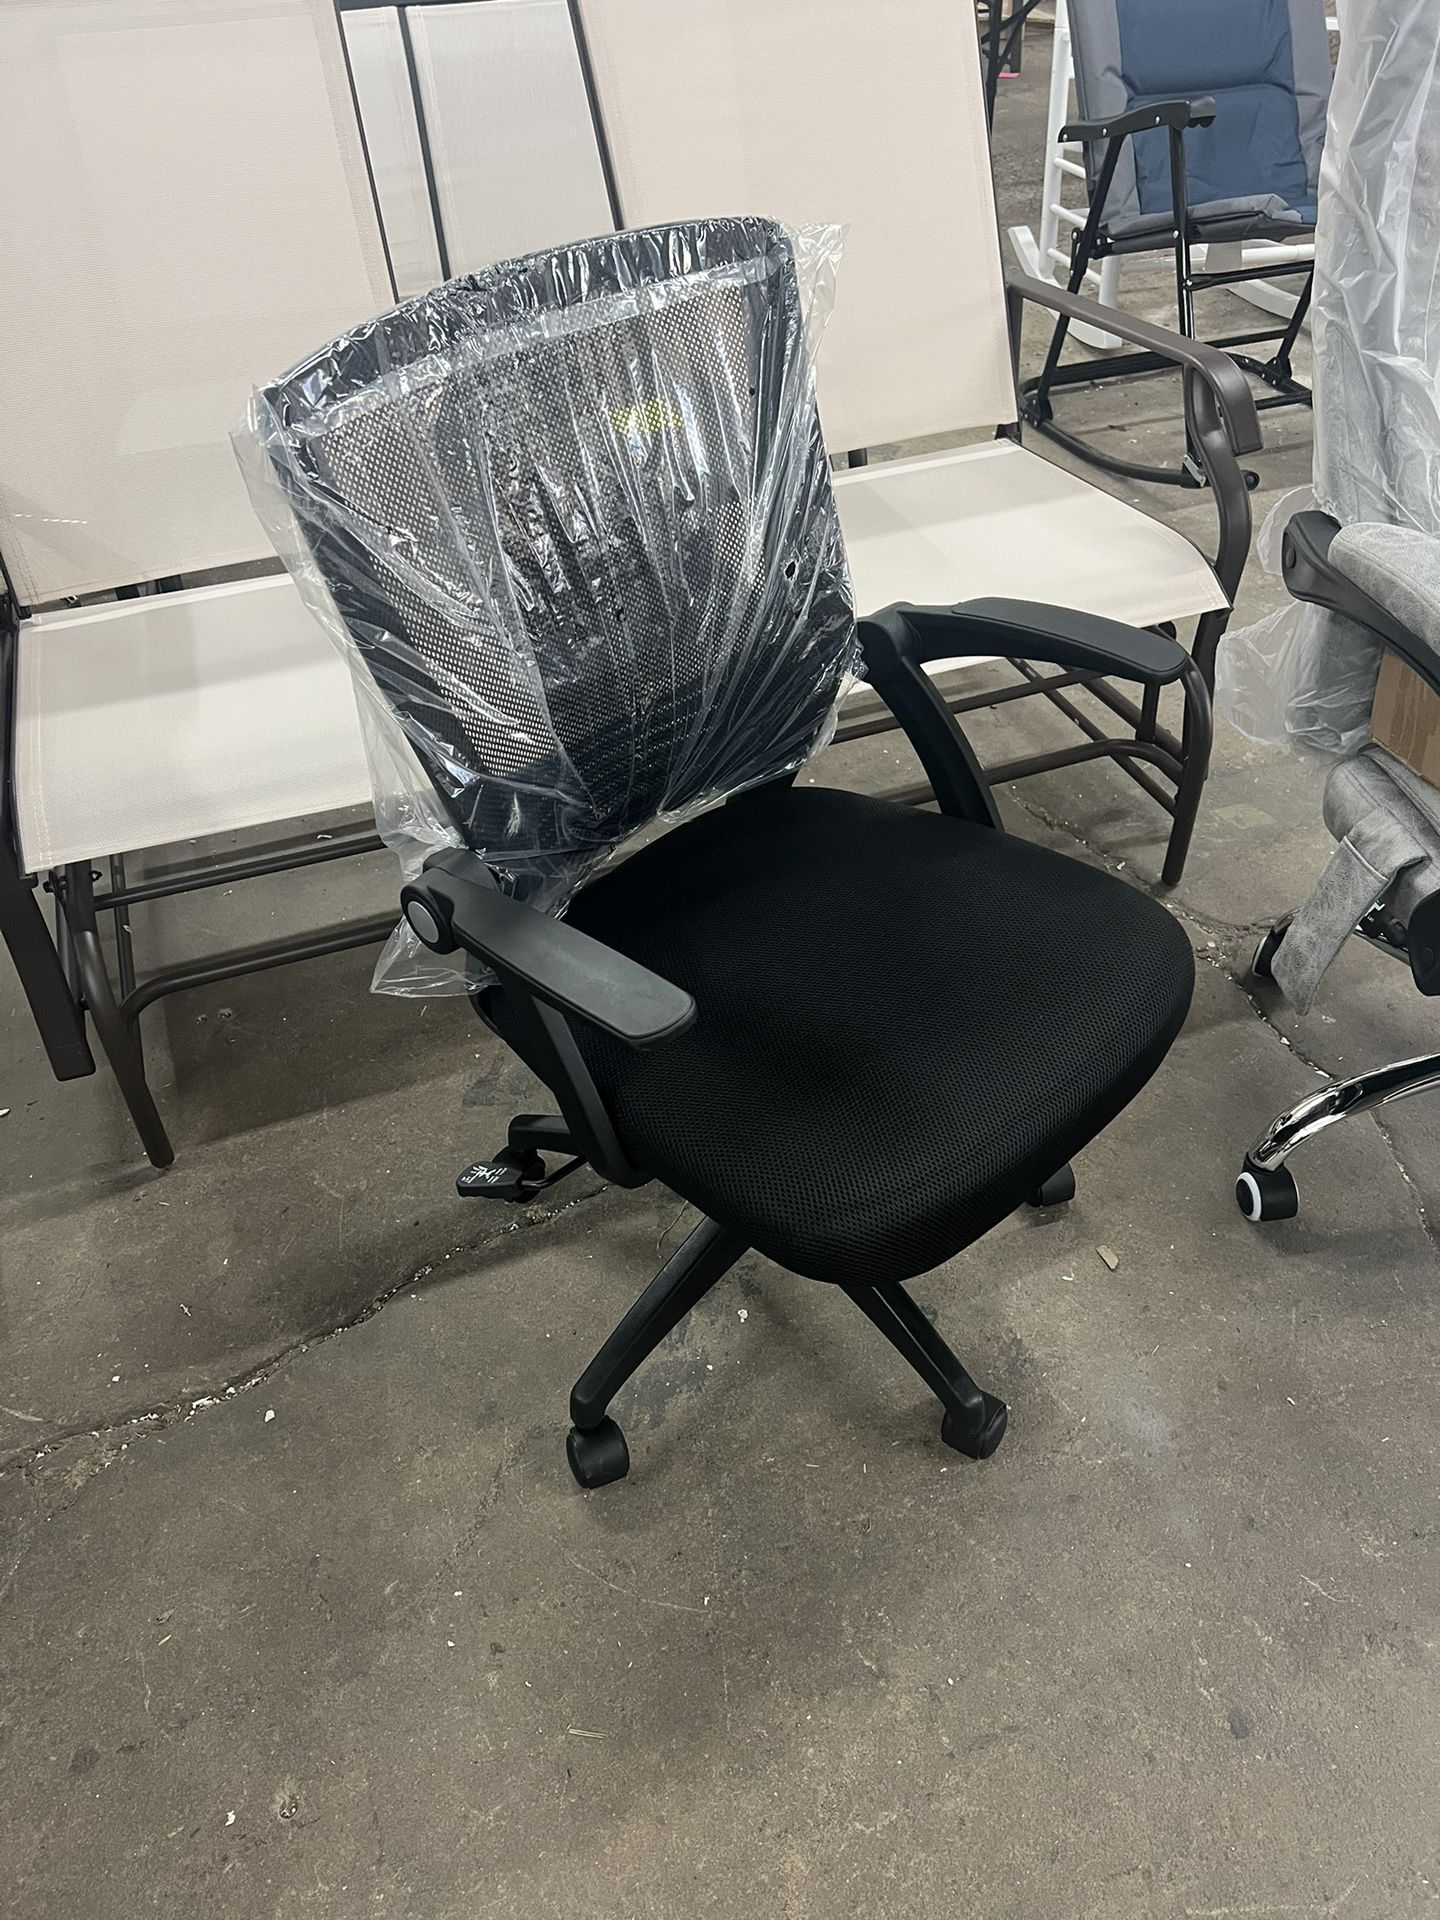 Office Chair, Ergonomic Desk Chair Mid-Back Computer Chair with Flip Up Arms and Lumbar Support, Mesh Office Chair with Wheels, Home Office Chair Swiv